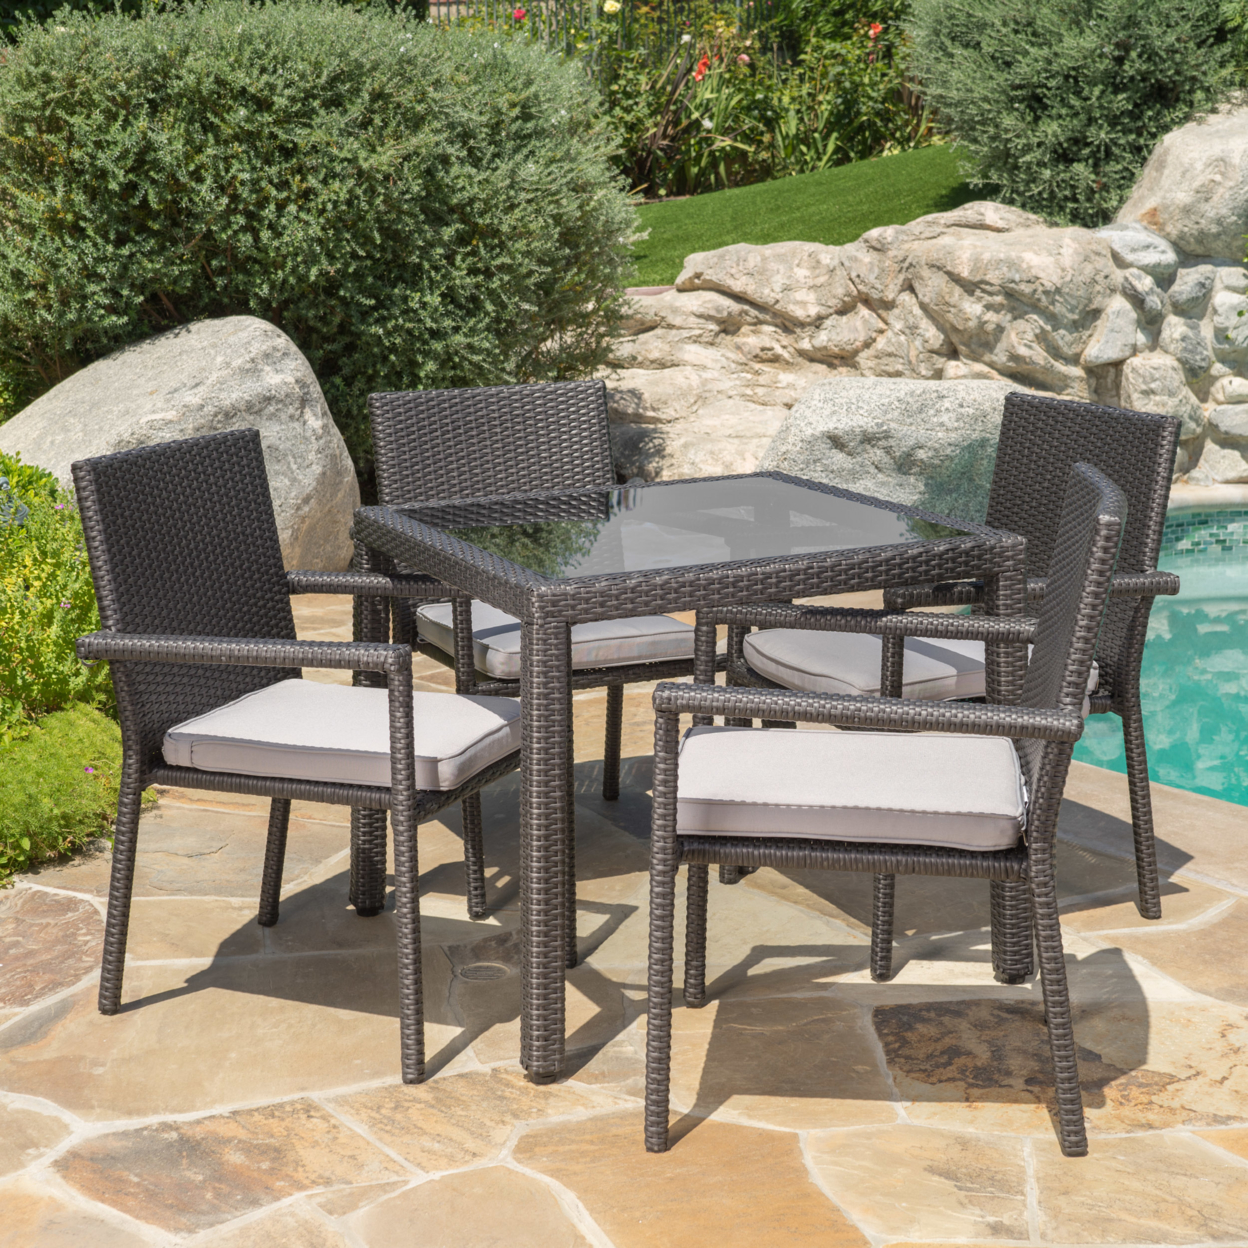 San Tropez Outdoor 5 Piece Dining Set With Water Resistant Cushions - Gray/Silver